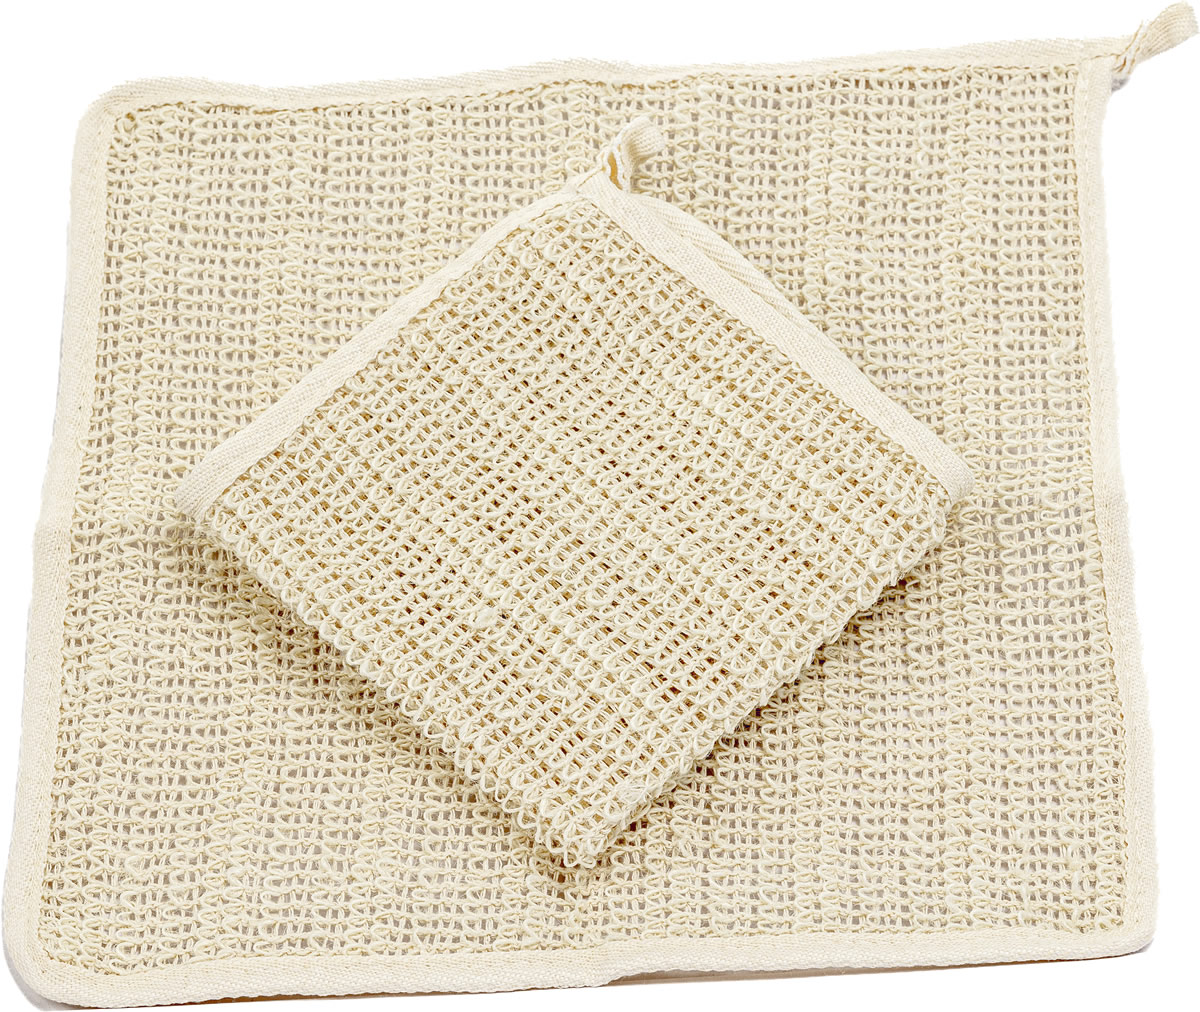 https://www.naturalbathbody.com/images/product/cambric-washcloth-small2.jpg